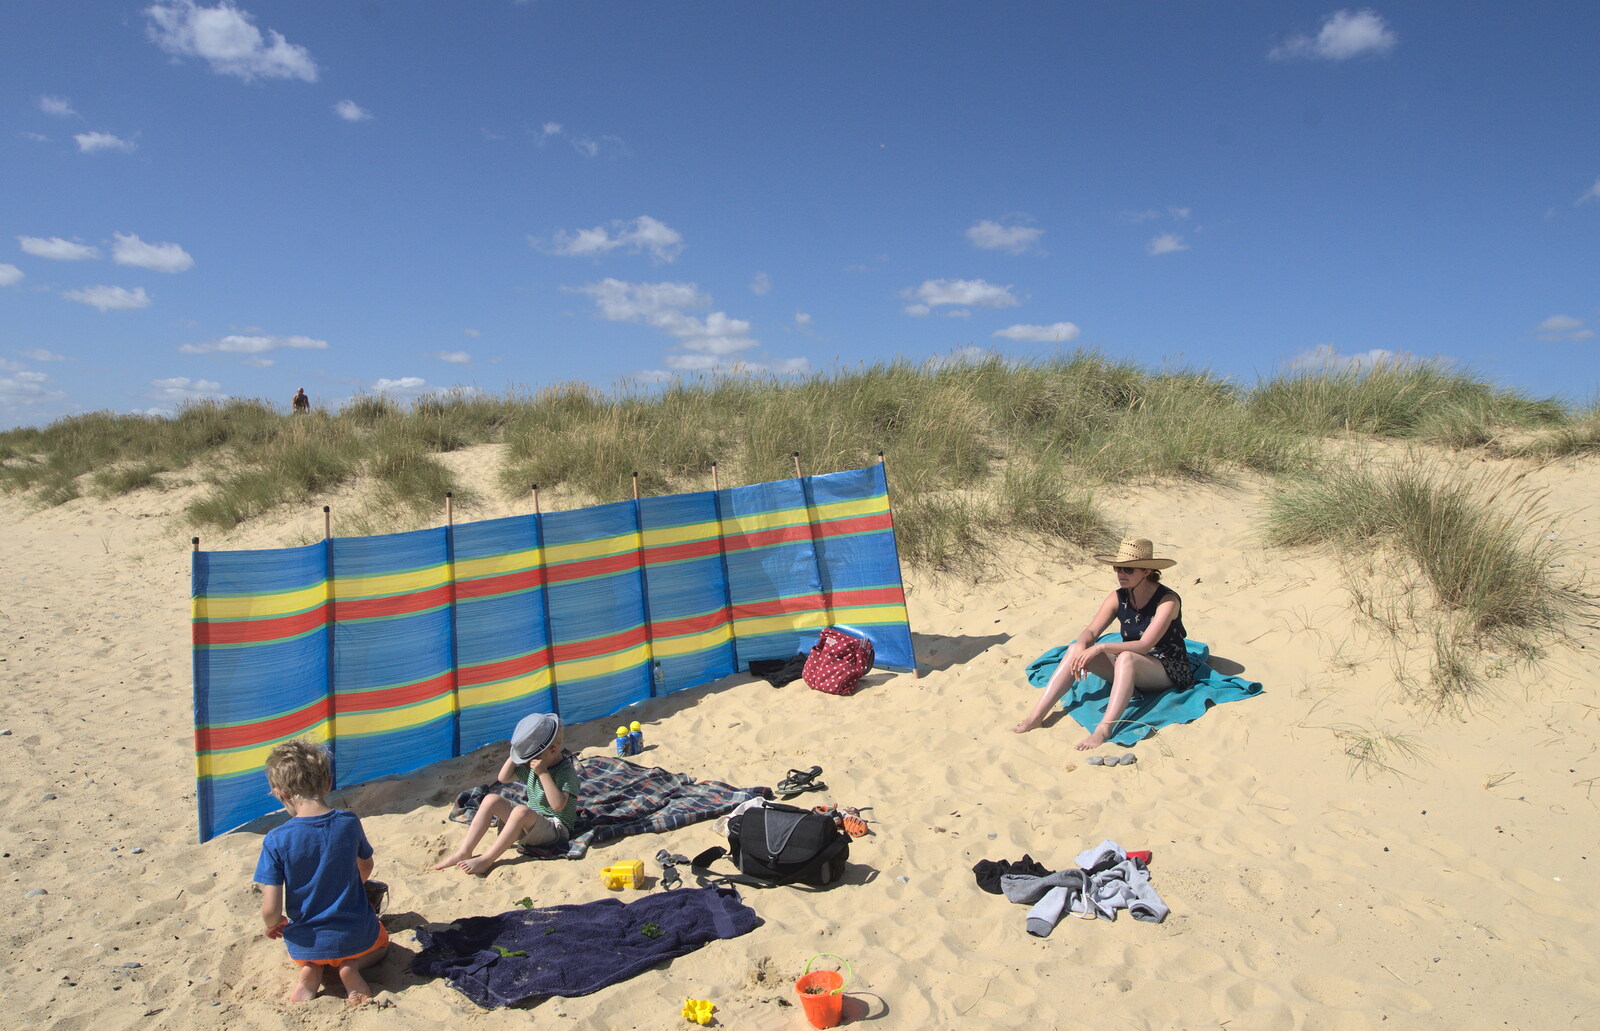 Our beach encampment from The Danger of Trees: A Camping (Mis)adventure - Southwold, Suffolk - 3rd August 2015